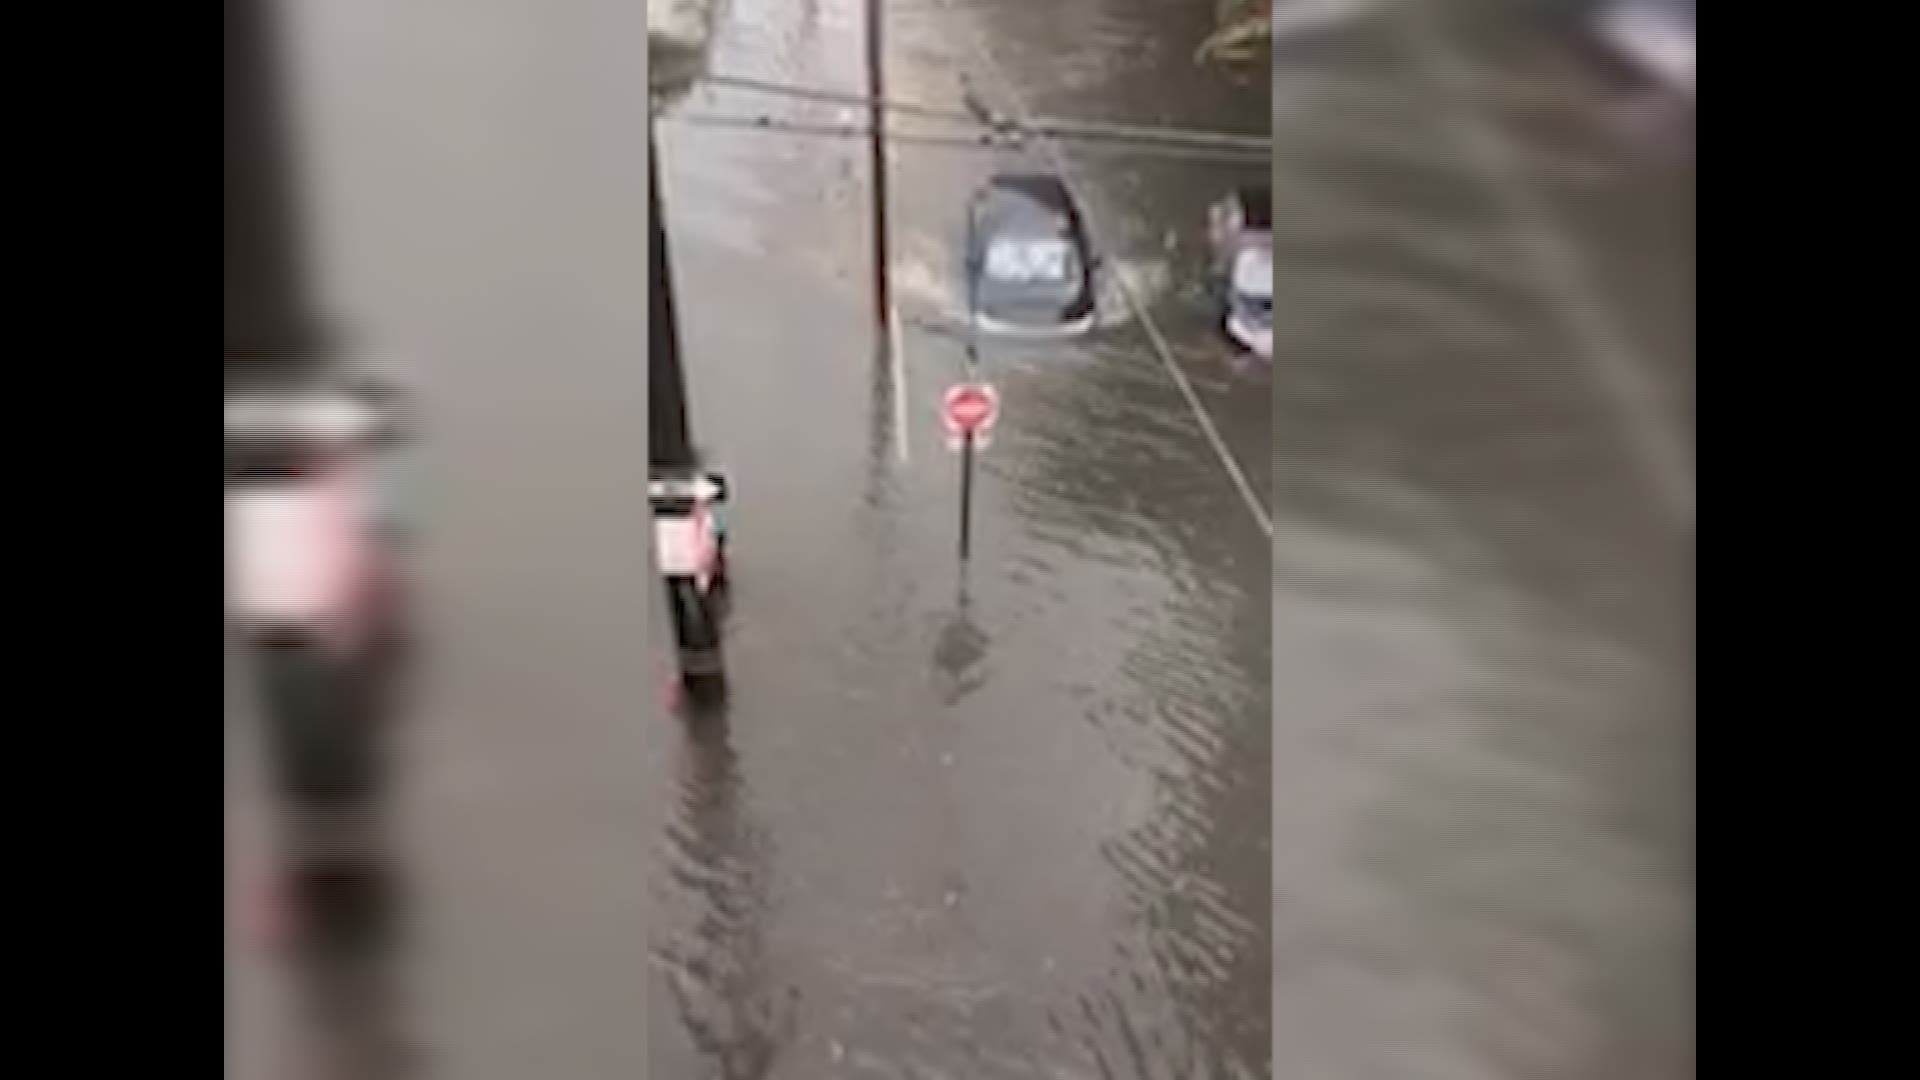 LSU student rescues woman from flooded car during New Orleans flooding.